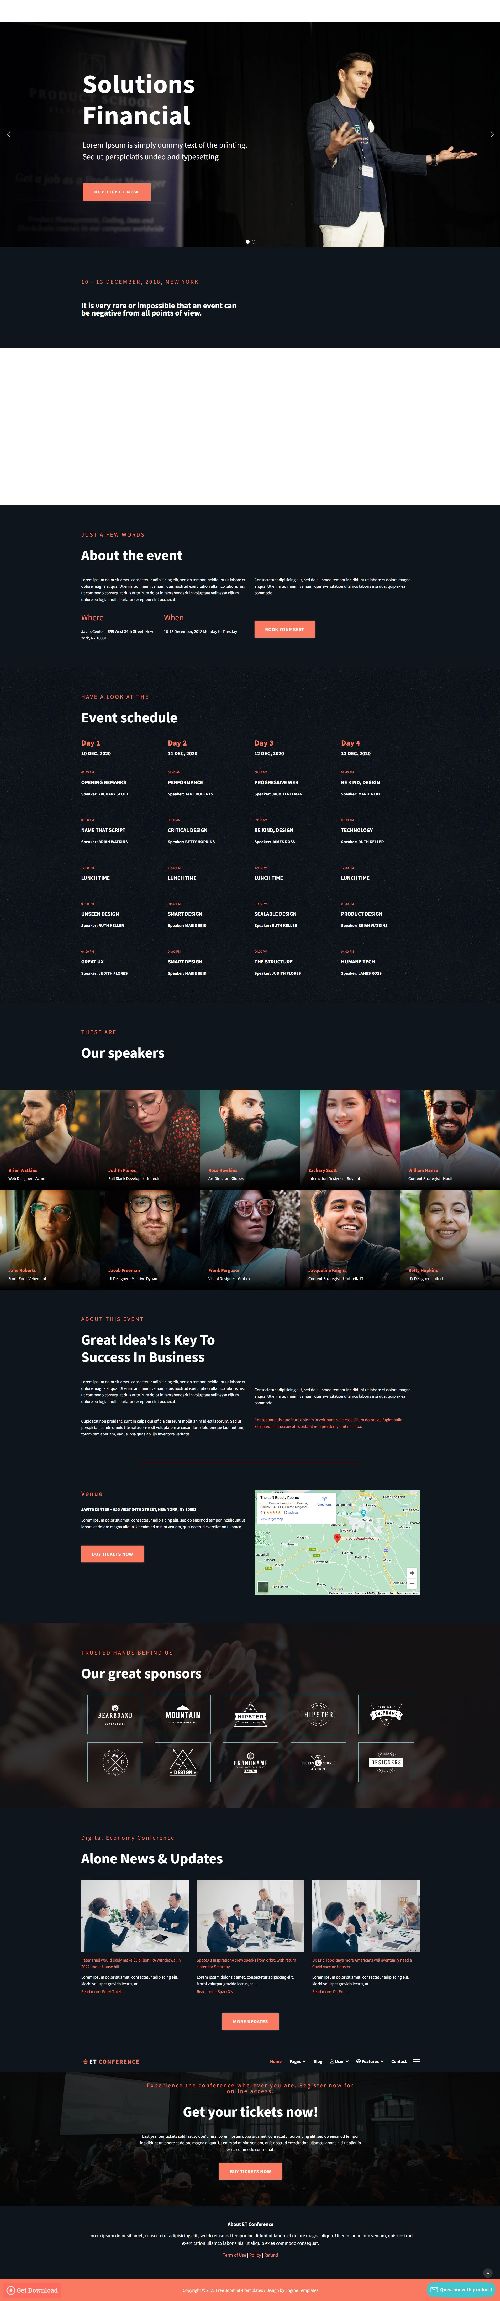 Conference - Conference and Talks Website Joomla 4 Template